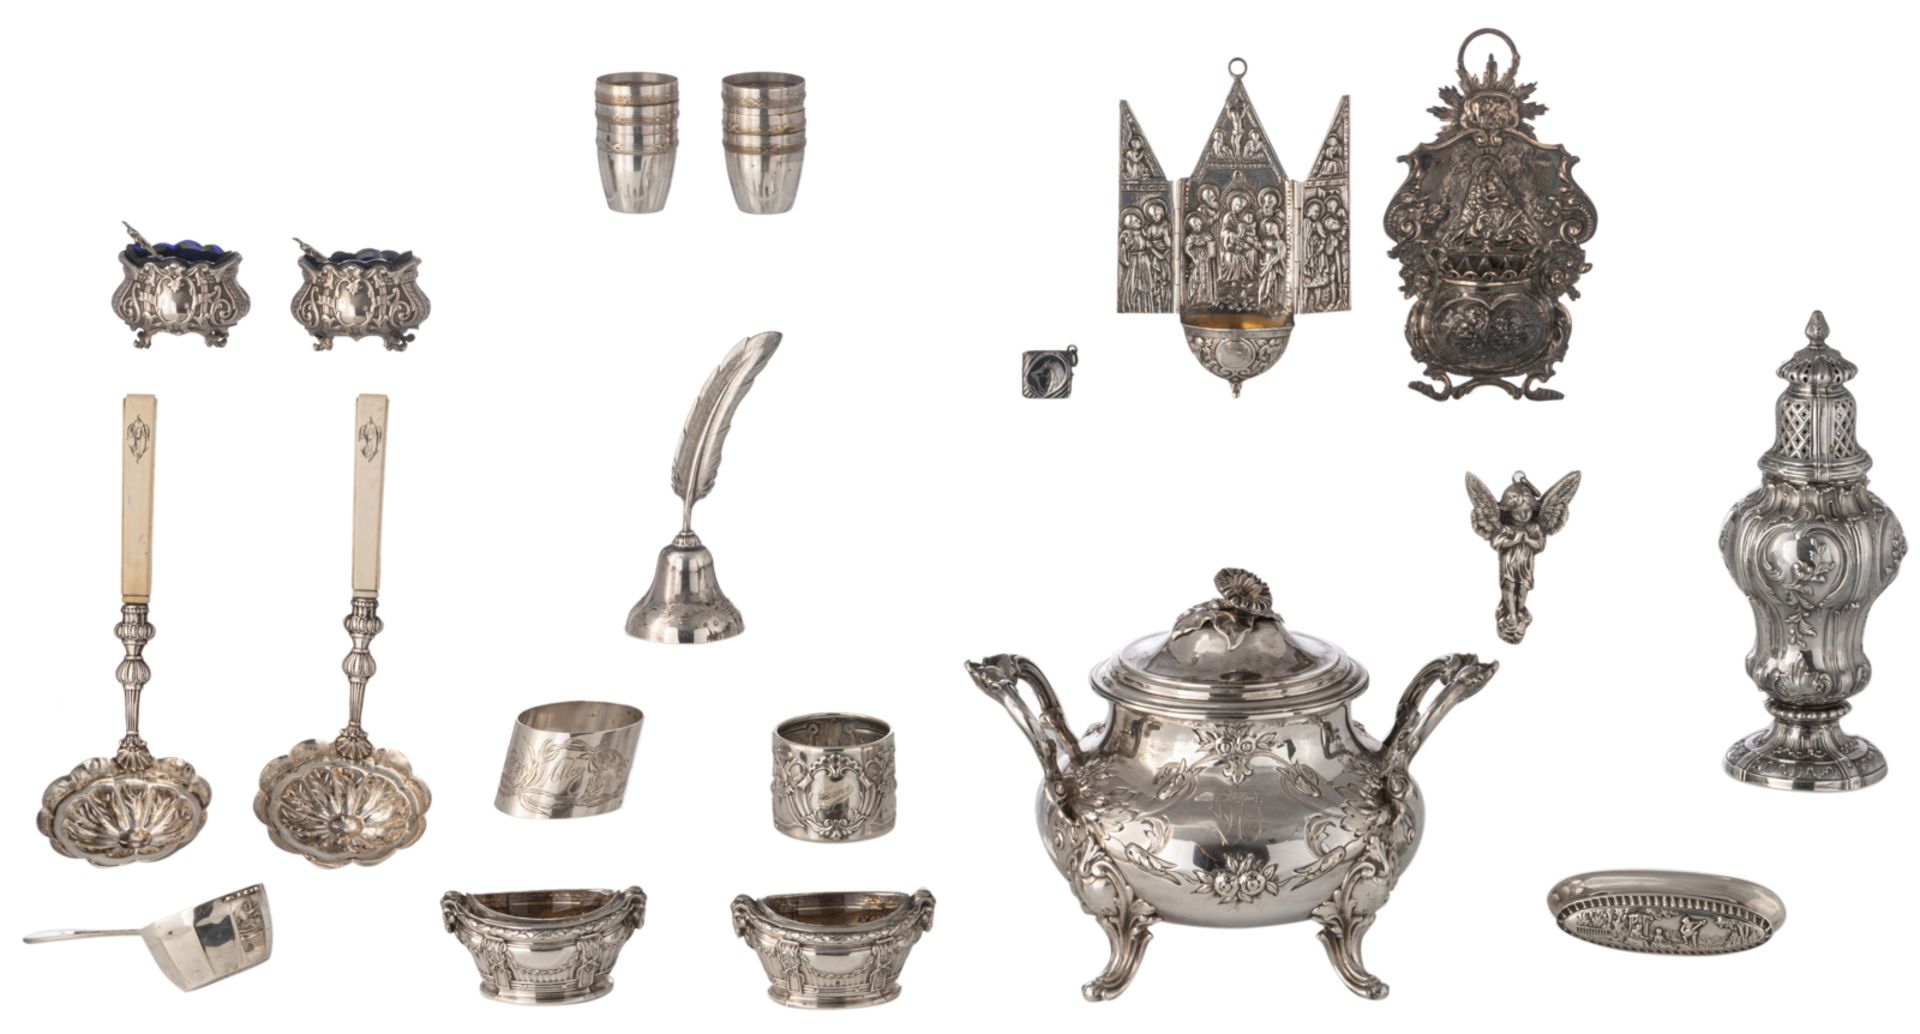 A French silver Rococo Revival sugar pot, a ditto caster and two sifting laddles with monogrammed iv